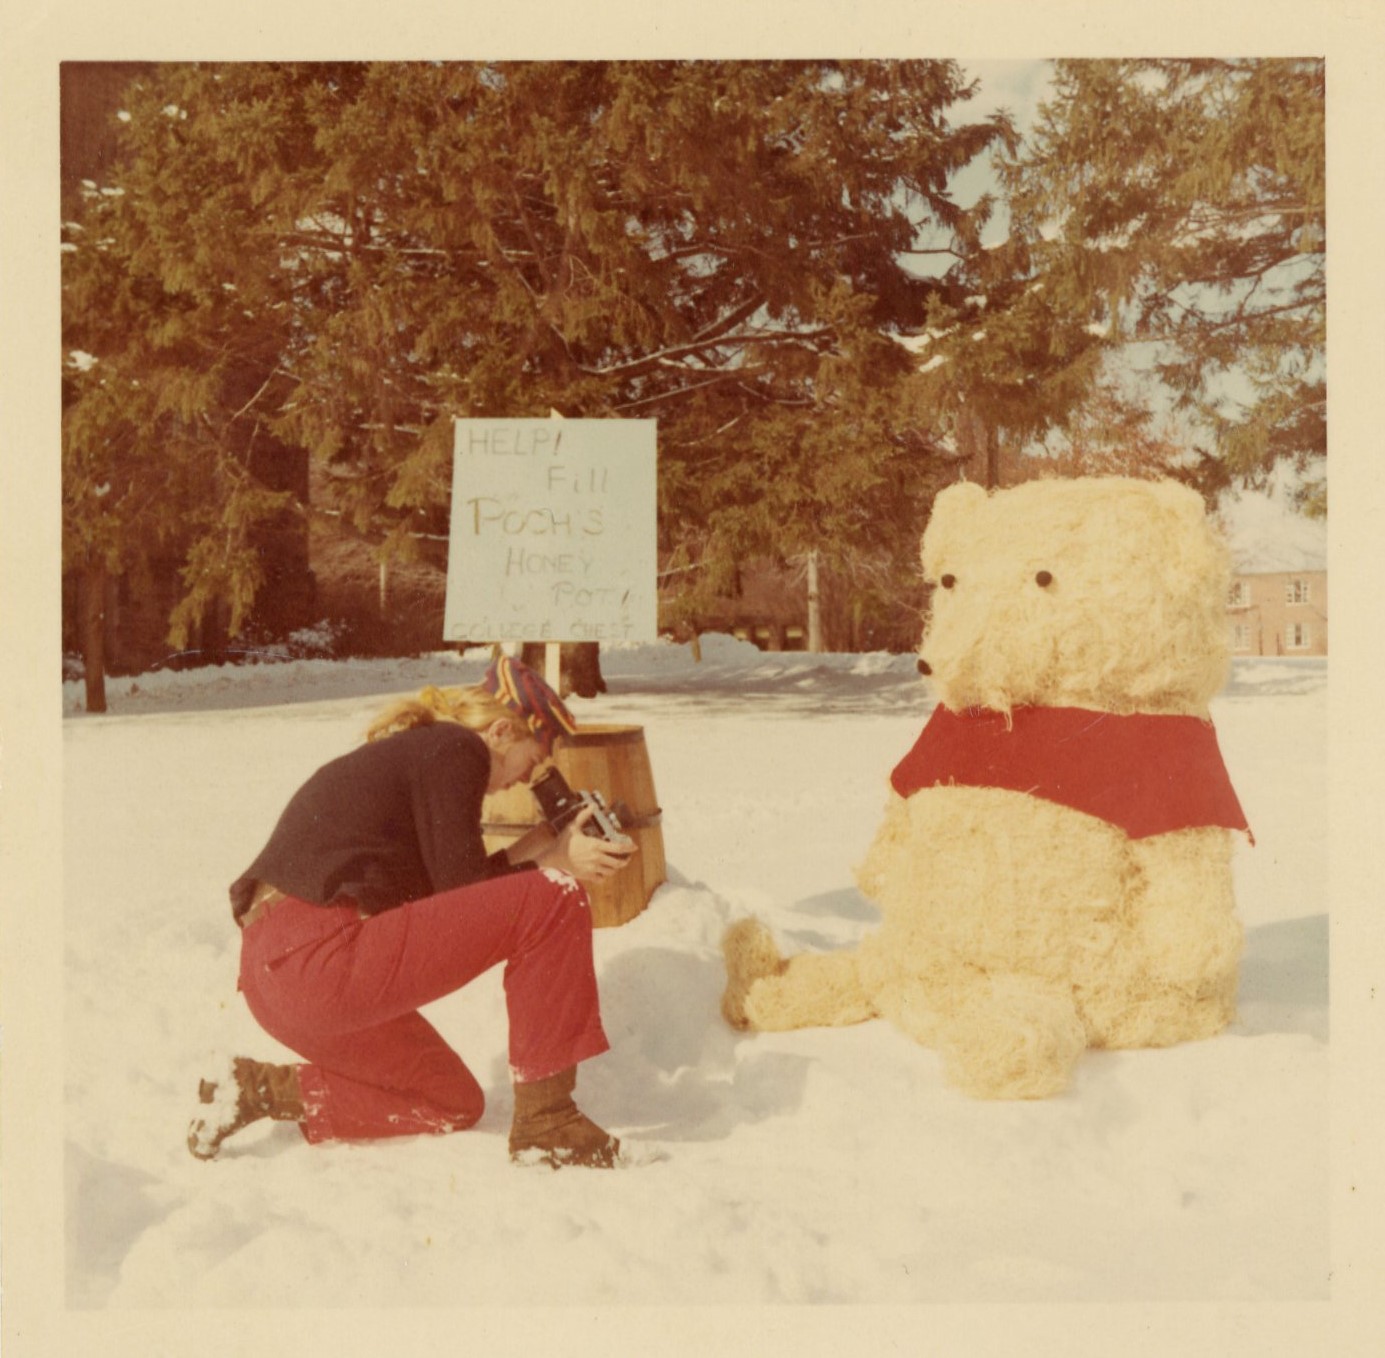 A student kneels in the snow to take a photo of a snow sculpture of Winnie the Pooh